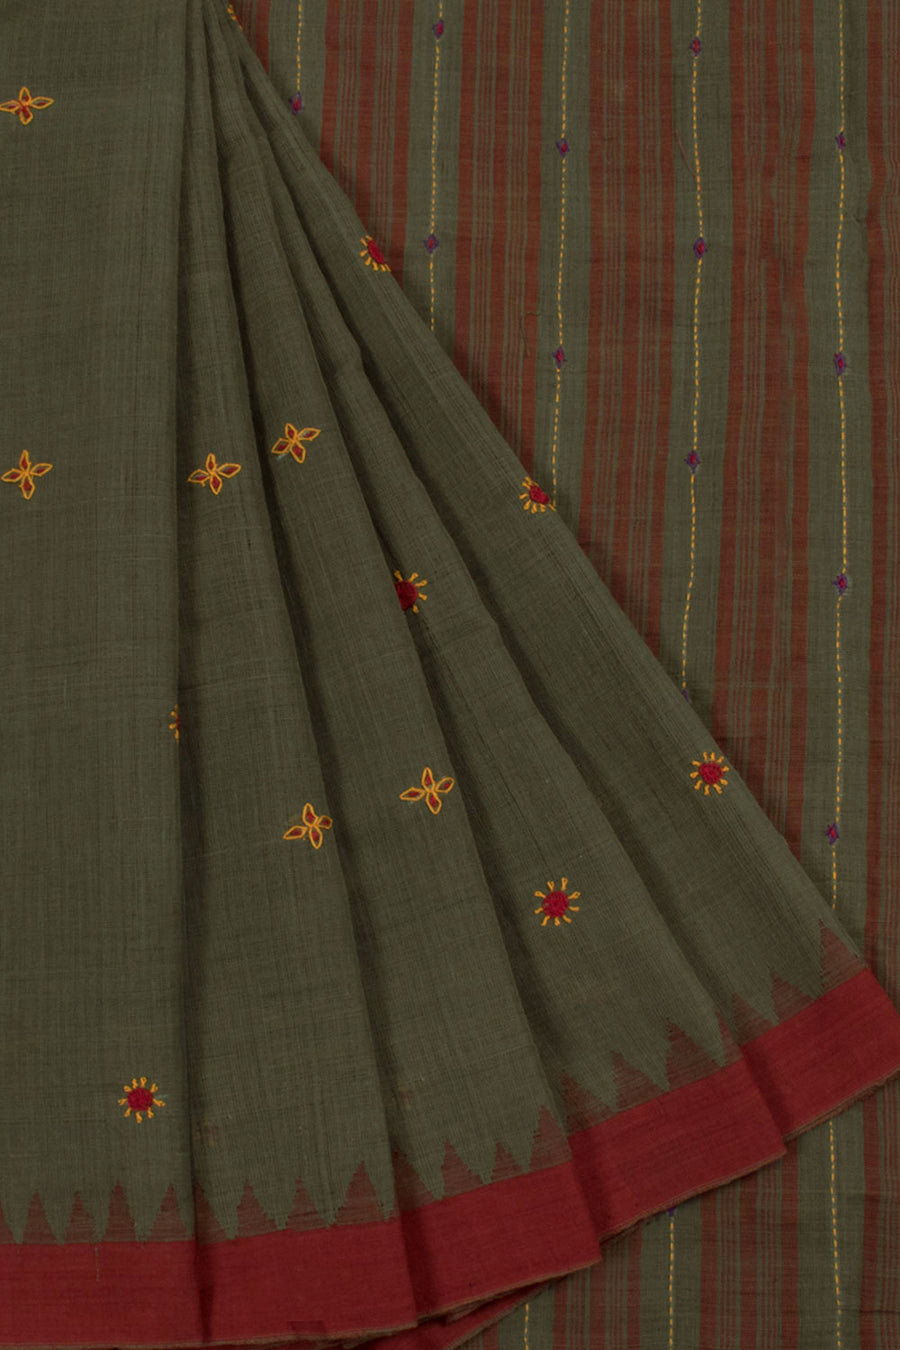 Handloom Natural Dye Khadi Cotton Saree with Floral Embroidery and Contrast Temple Border